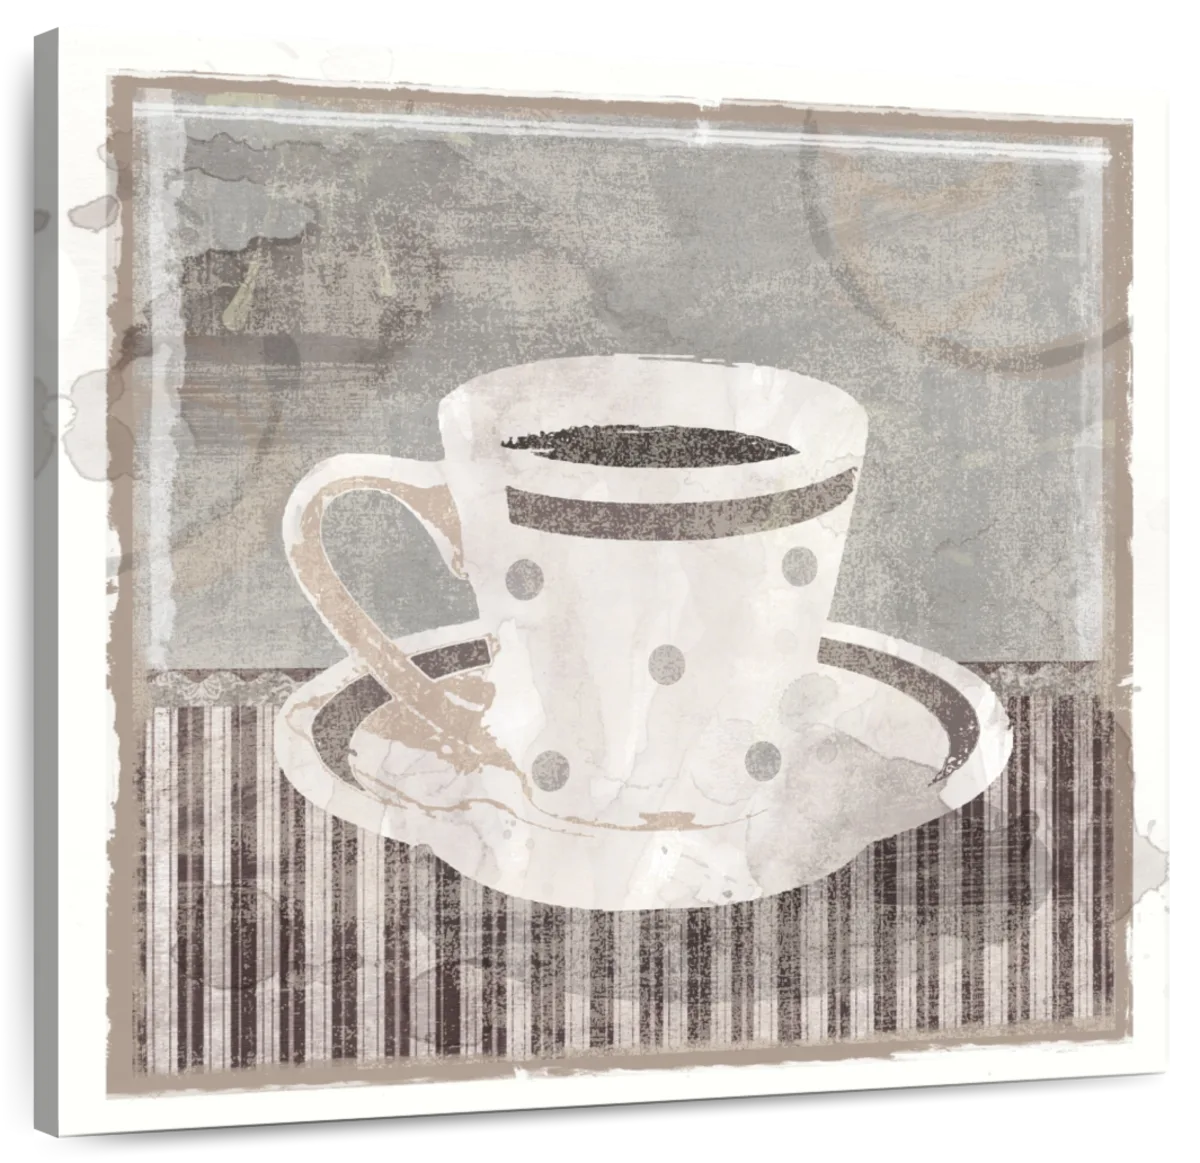 https://cdn.shopify.com/s/files/1/1568/8443/products/qjp_art_4kd_layout_1_square_simple-cup-i-wall-art.webp?v=1669144539